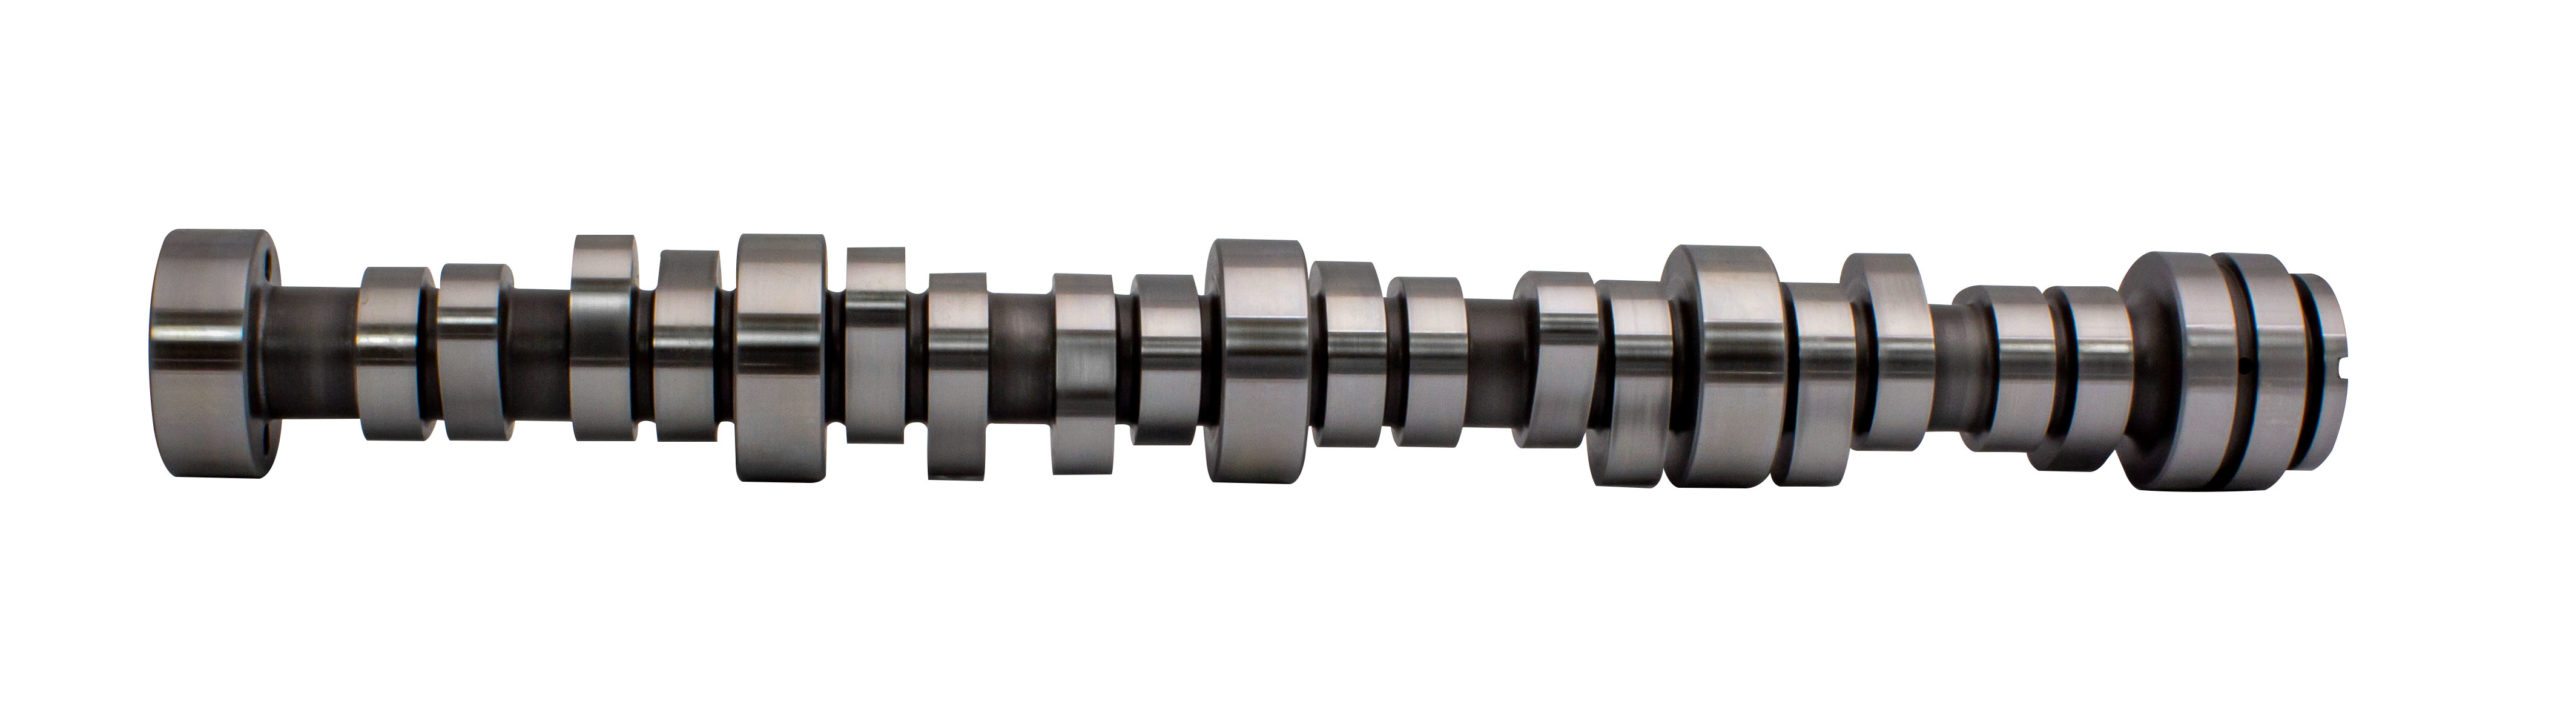 Finish Ground Camshafts and Cores Image